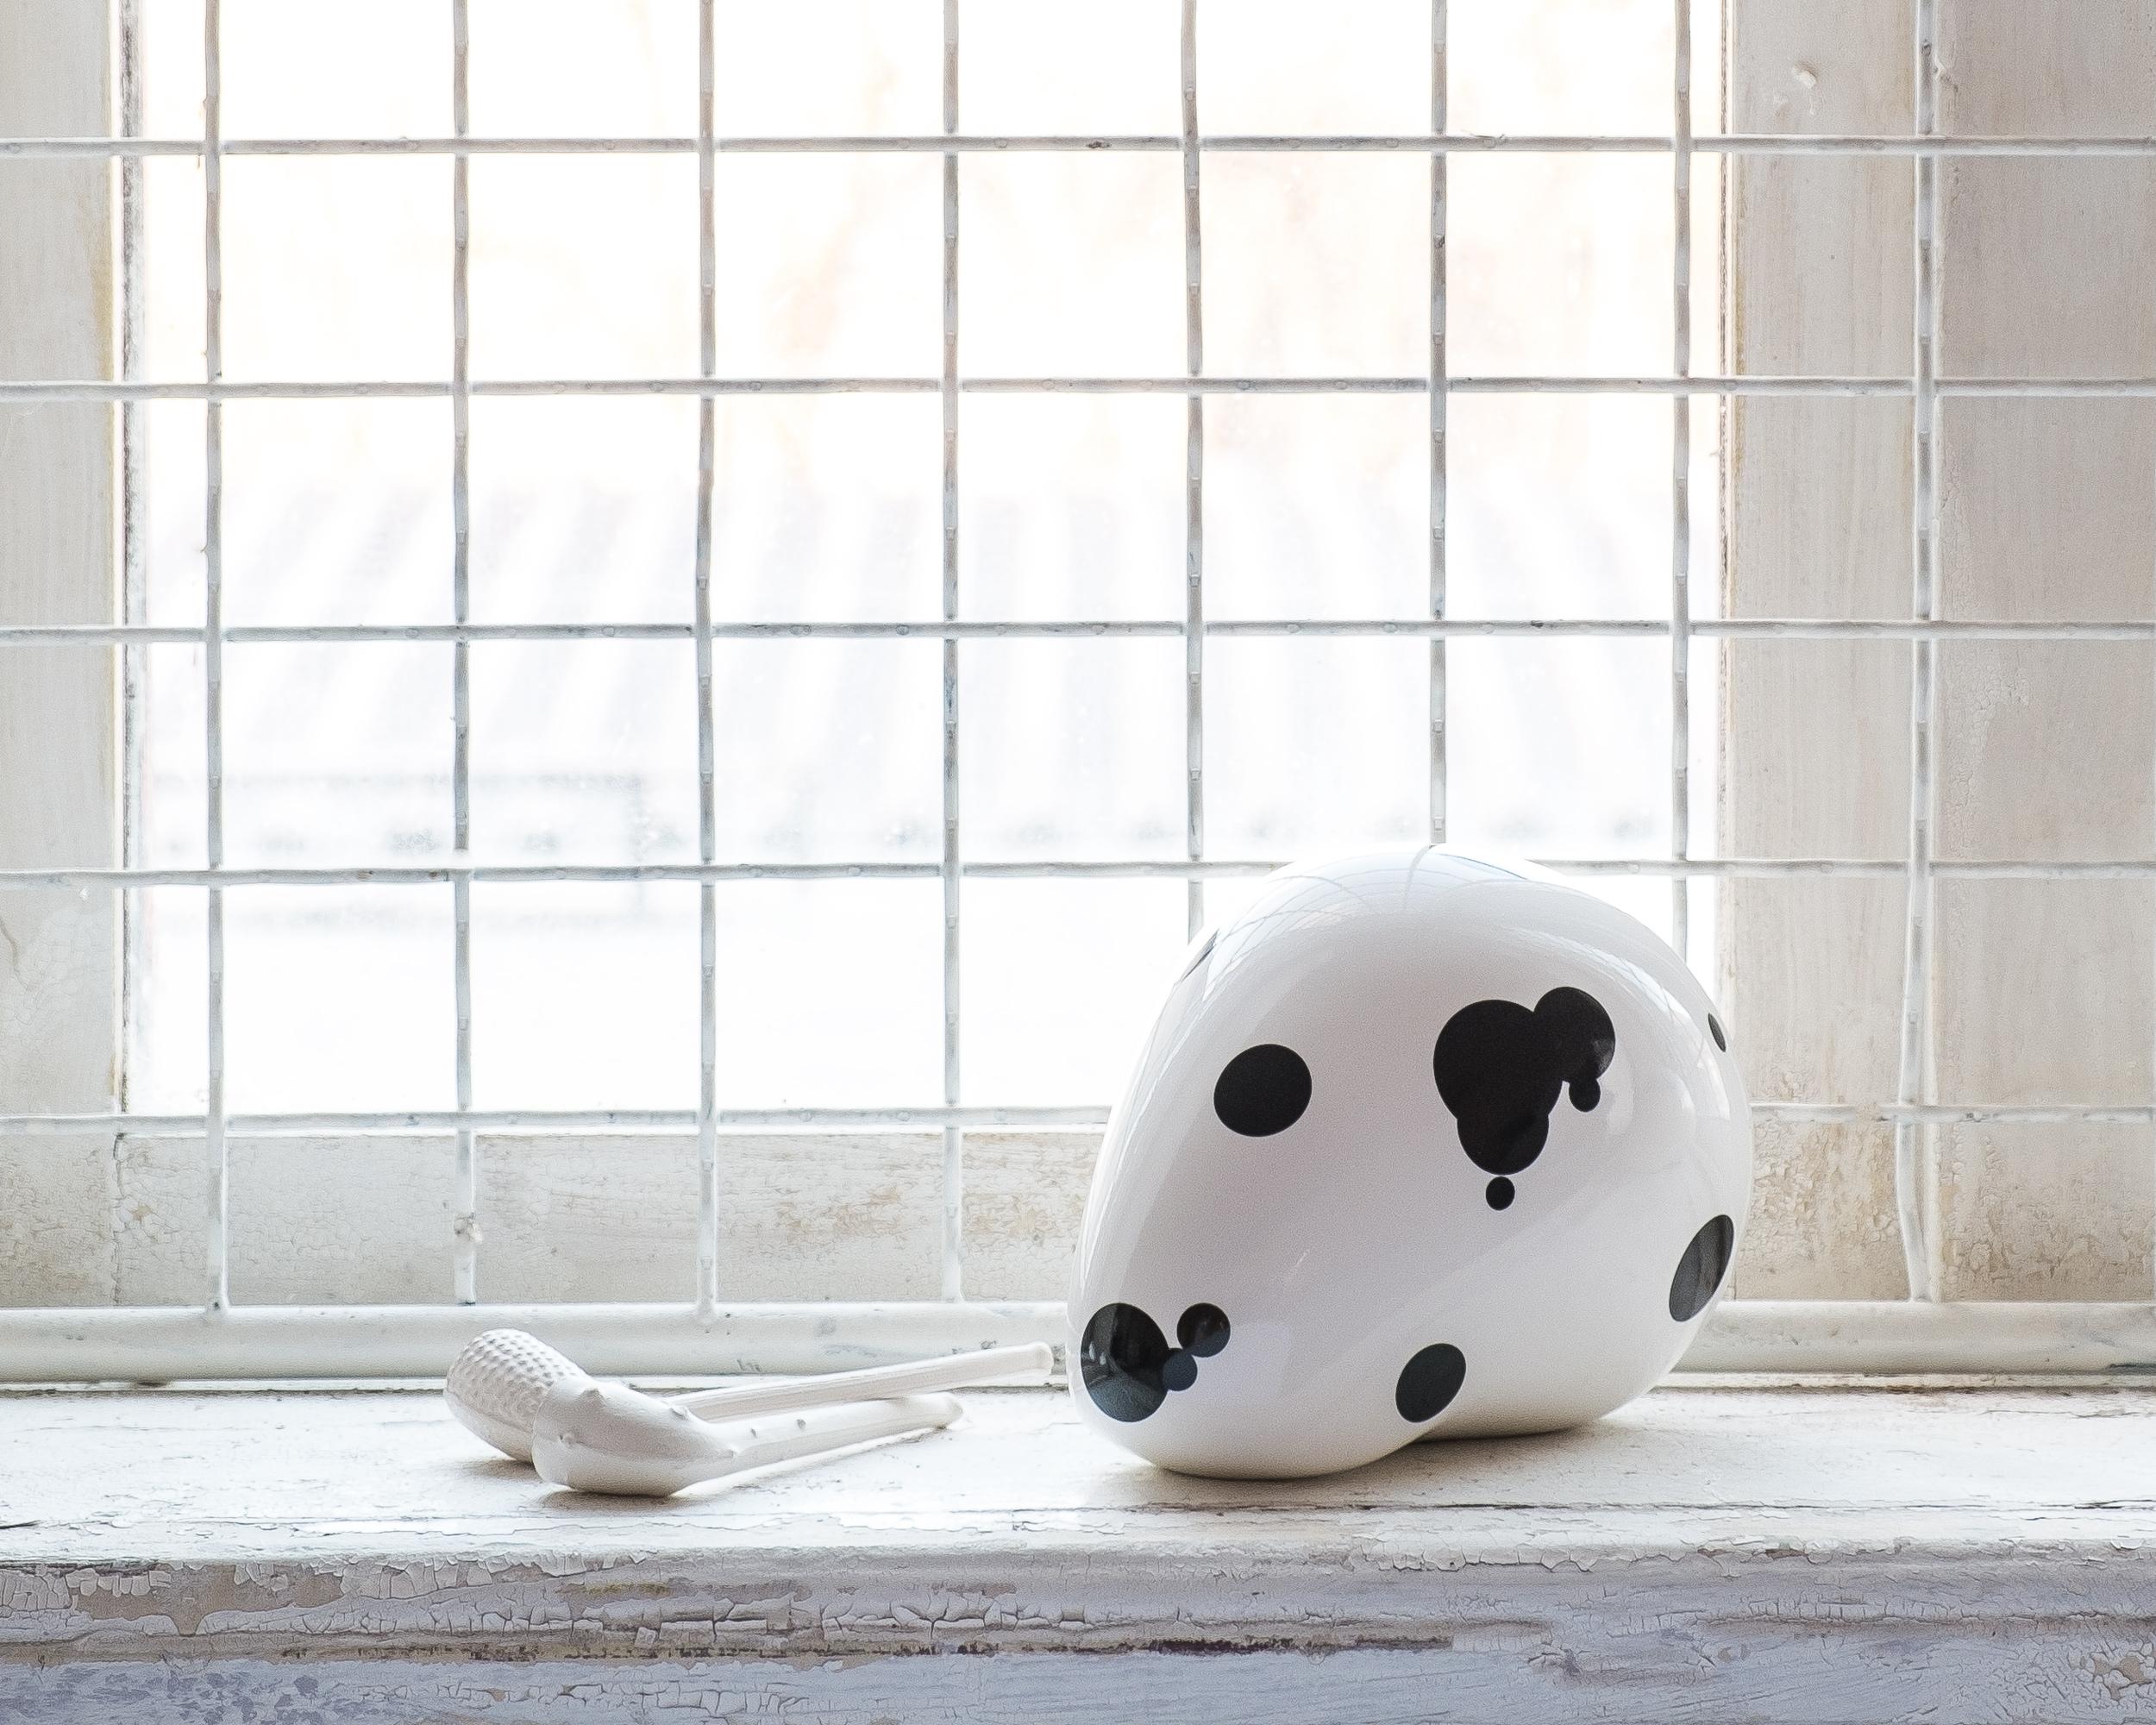 A shiny white porcelain figurine/sculpture titled Dalmation is a human skull redefined as a simplistic industrial form. Inglazed dots in different sizes imply the human's best friend since the Stone Age – the dog. Modeled in CAD, 3d printed, and